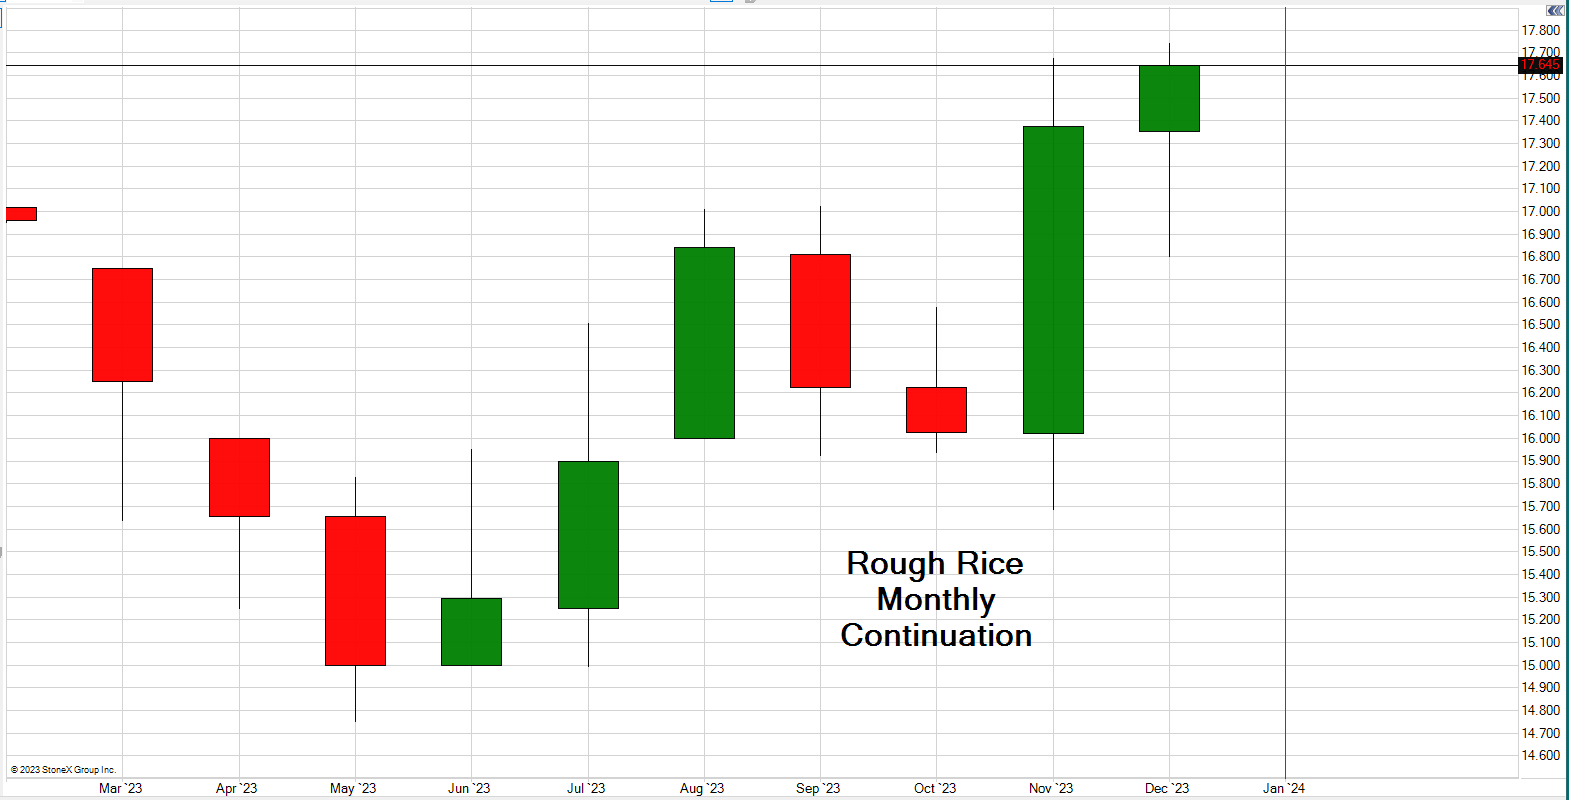 Rough Rice Futures Trading Chart updated October 13th, 2022